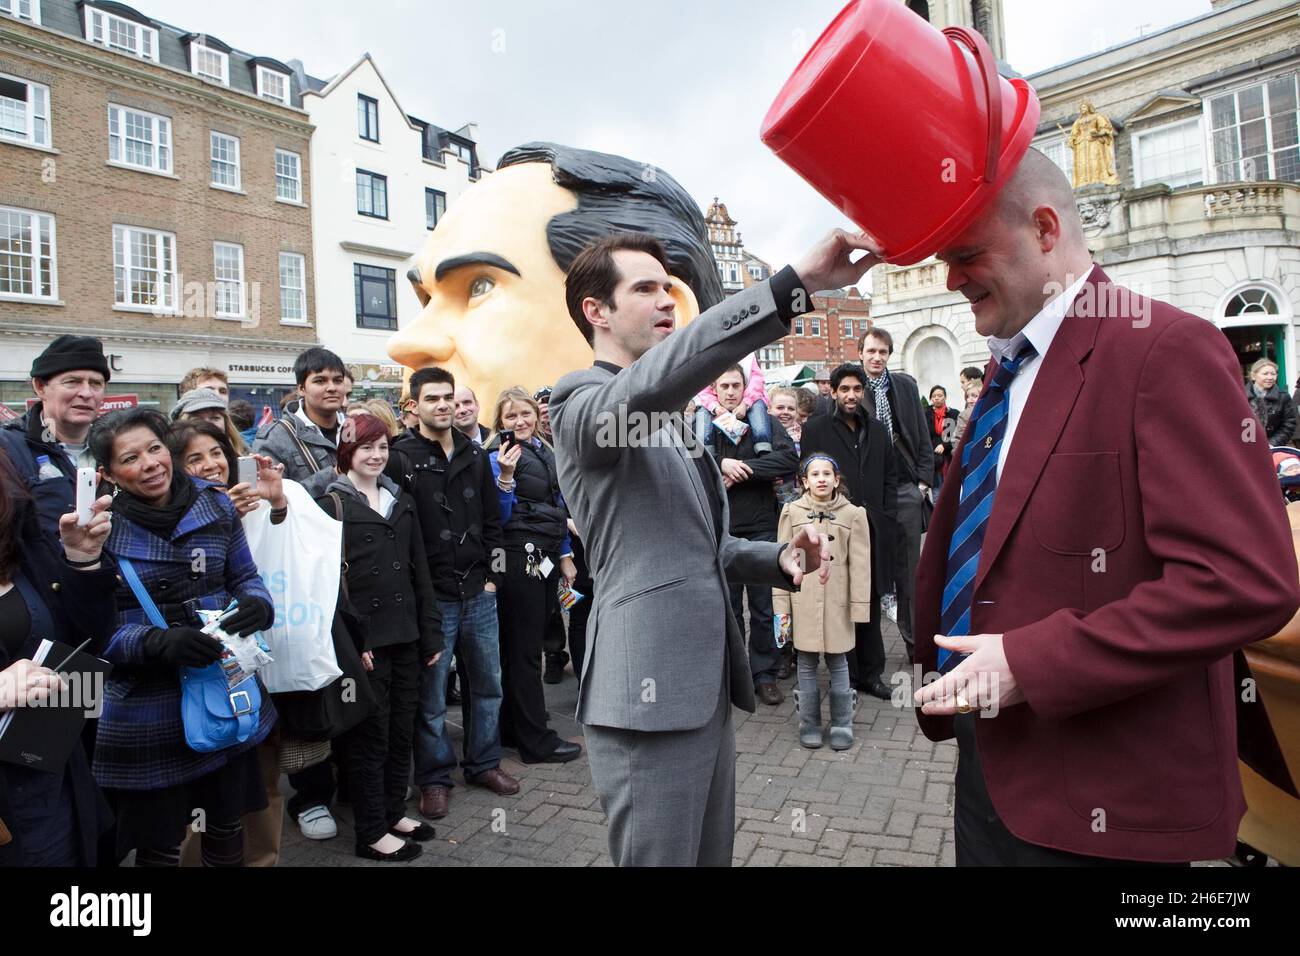 Al Murray the pub landlord and Jimmy Carr in the latest Walkers ad for Comic Relief shot in Kingston - in a bid to raise over Â£1million this Red Nose Day with their very own Walkers crisps! The ad will air on 16th February. Stock Photo